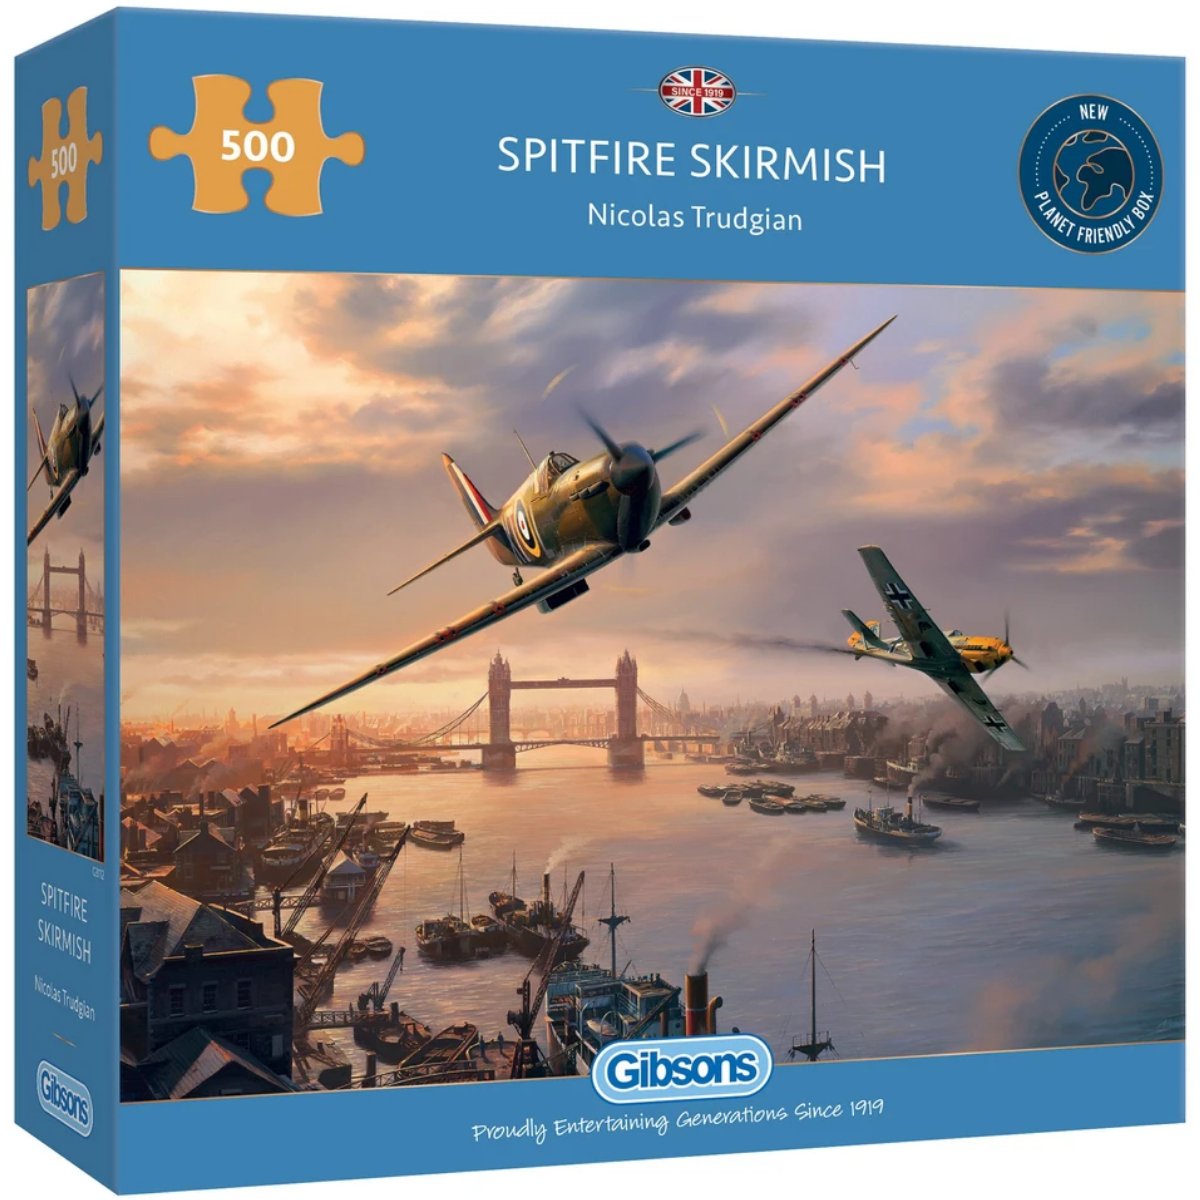 Gibsons Spitfire Skirmish Jigsaw Puzzle (500 Pieces)